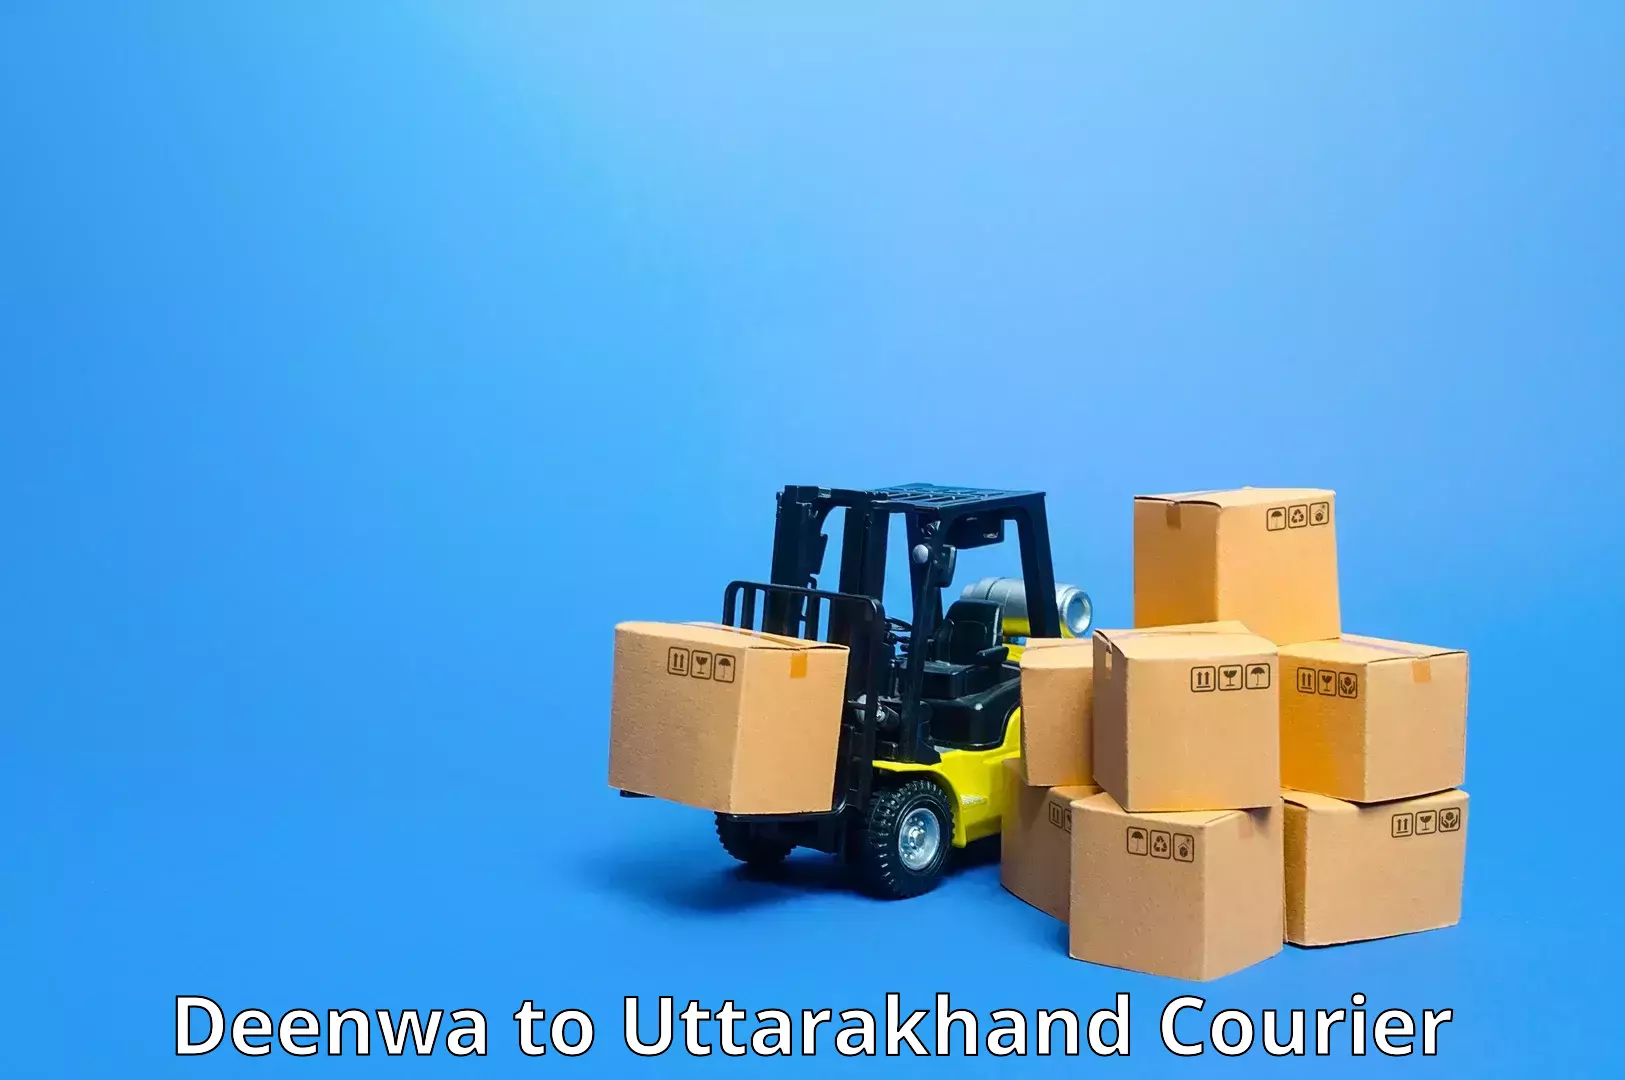 Express delivery capabilities Deenwa to Tehri